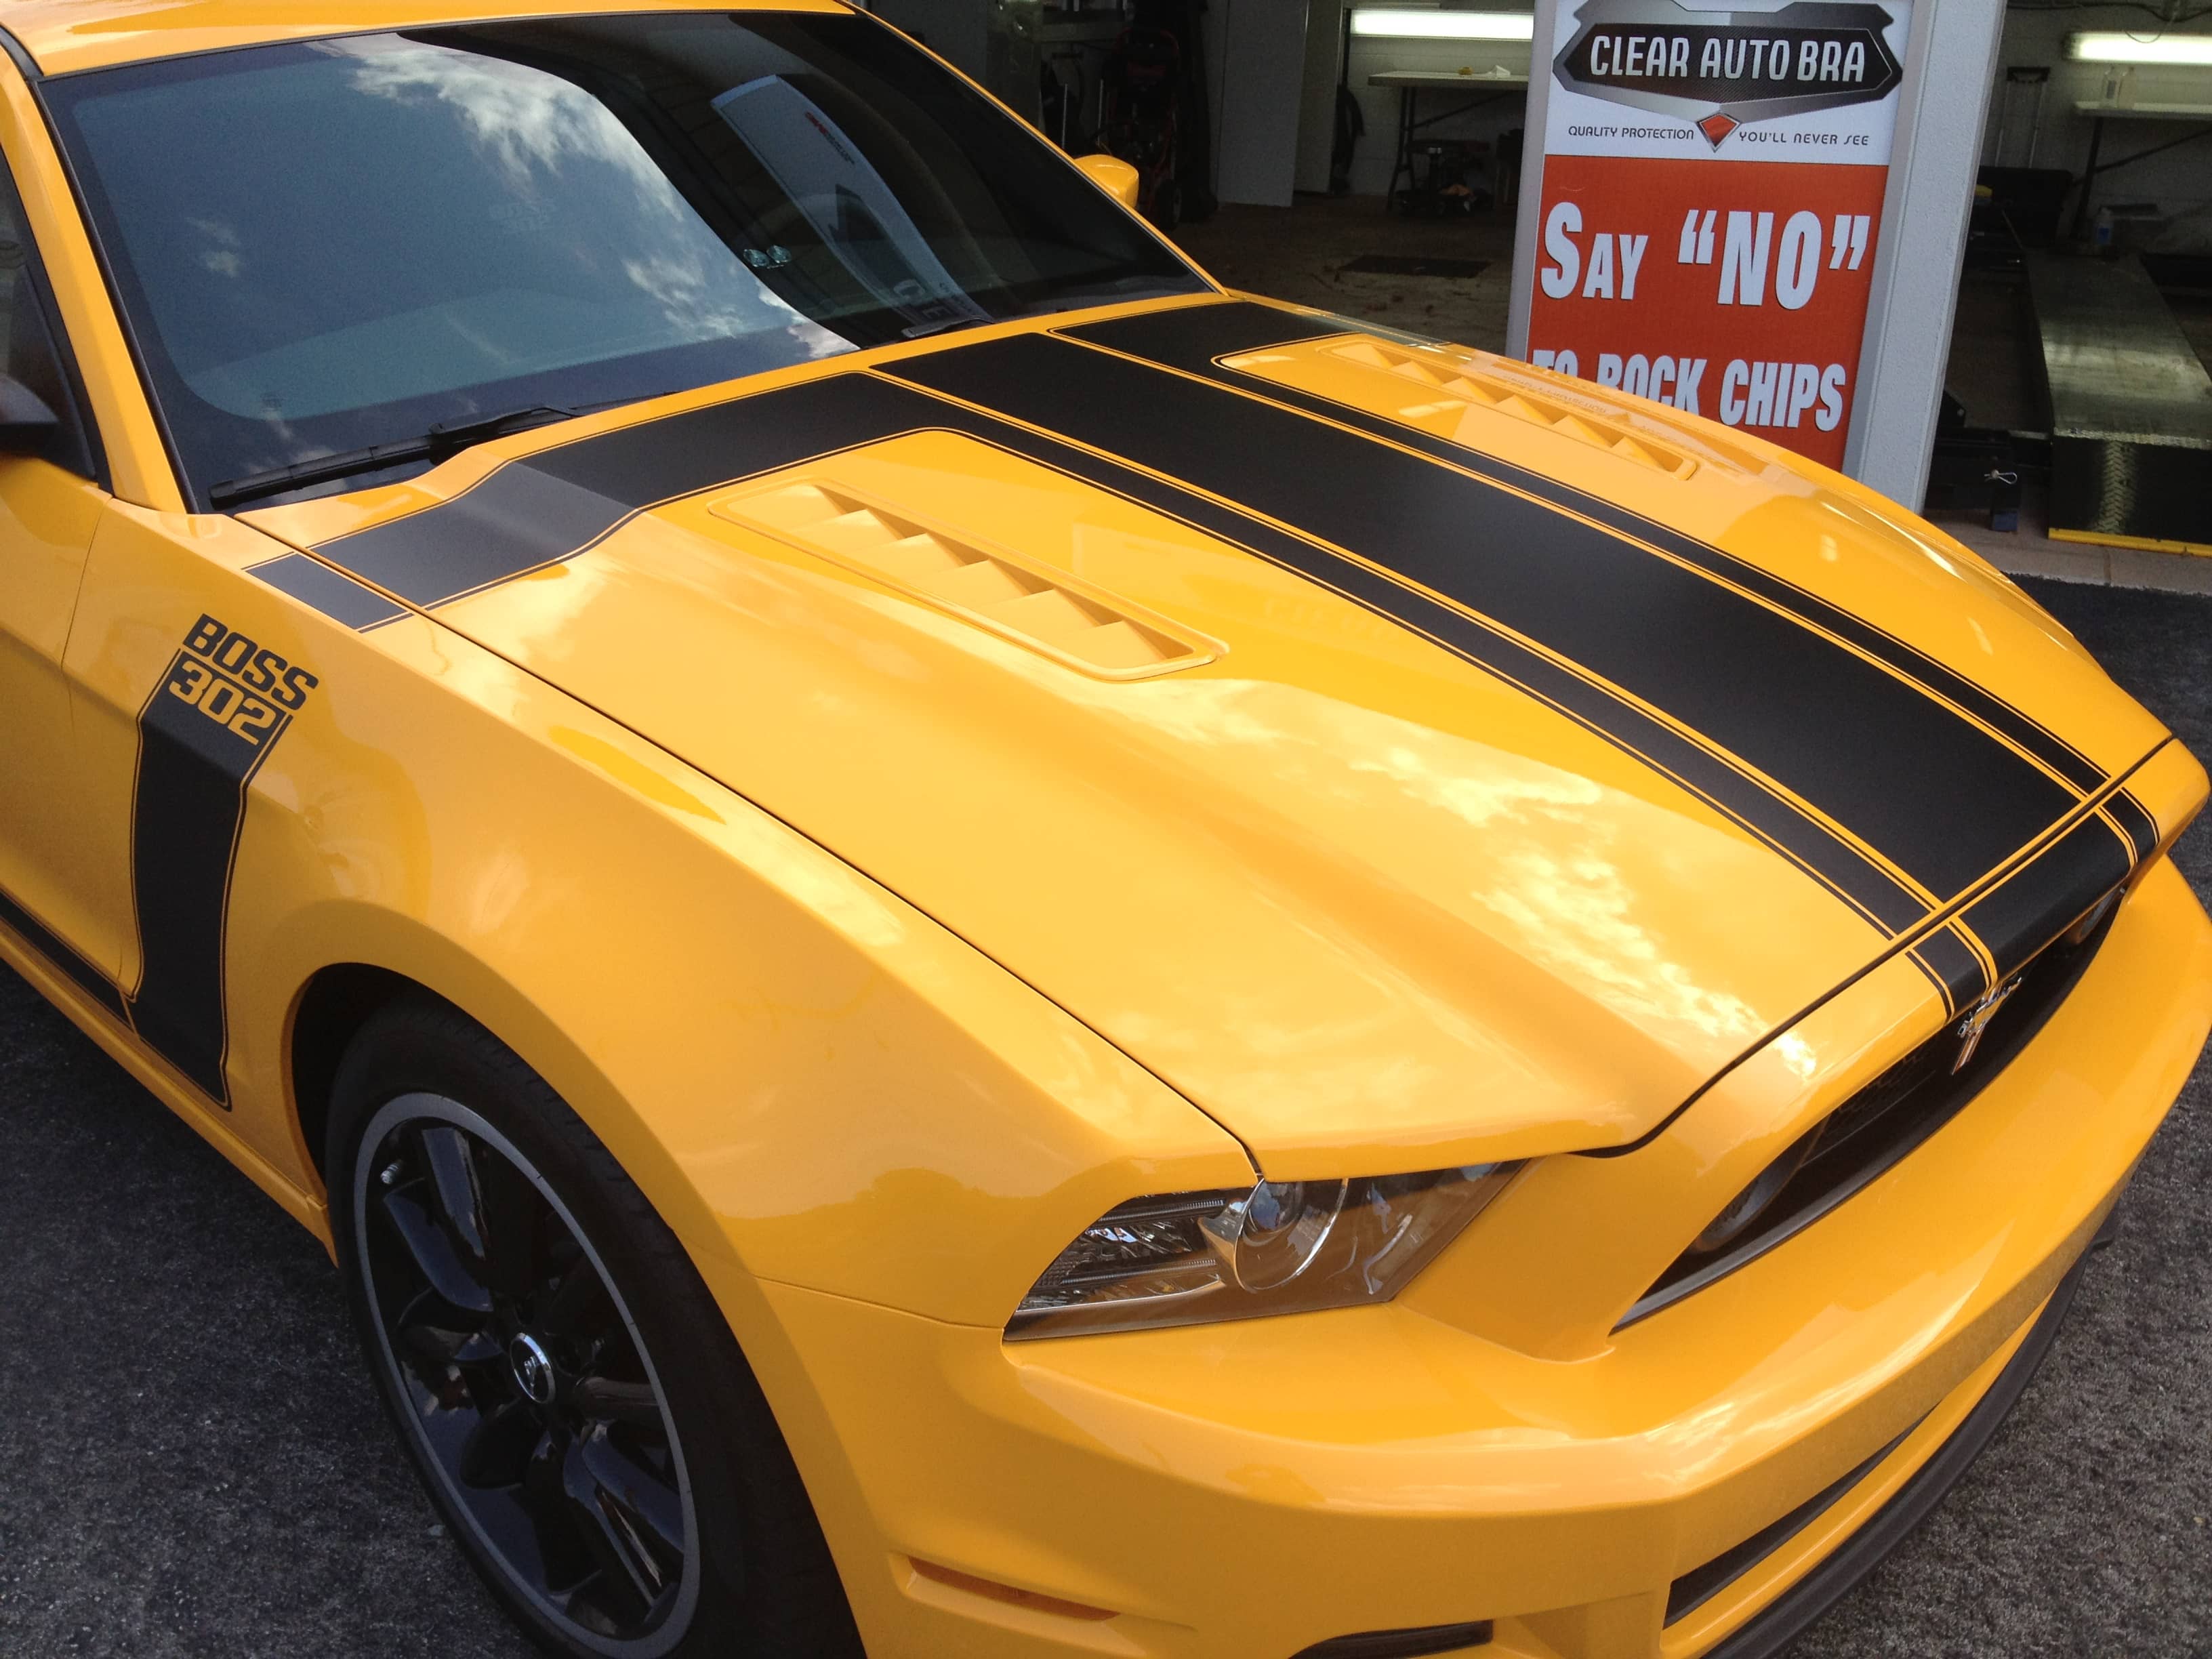 Ford Mustang BOSS 302 specialists paint protection film St. Louis against chips 3M Scotchgard and XPEL